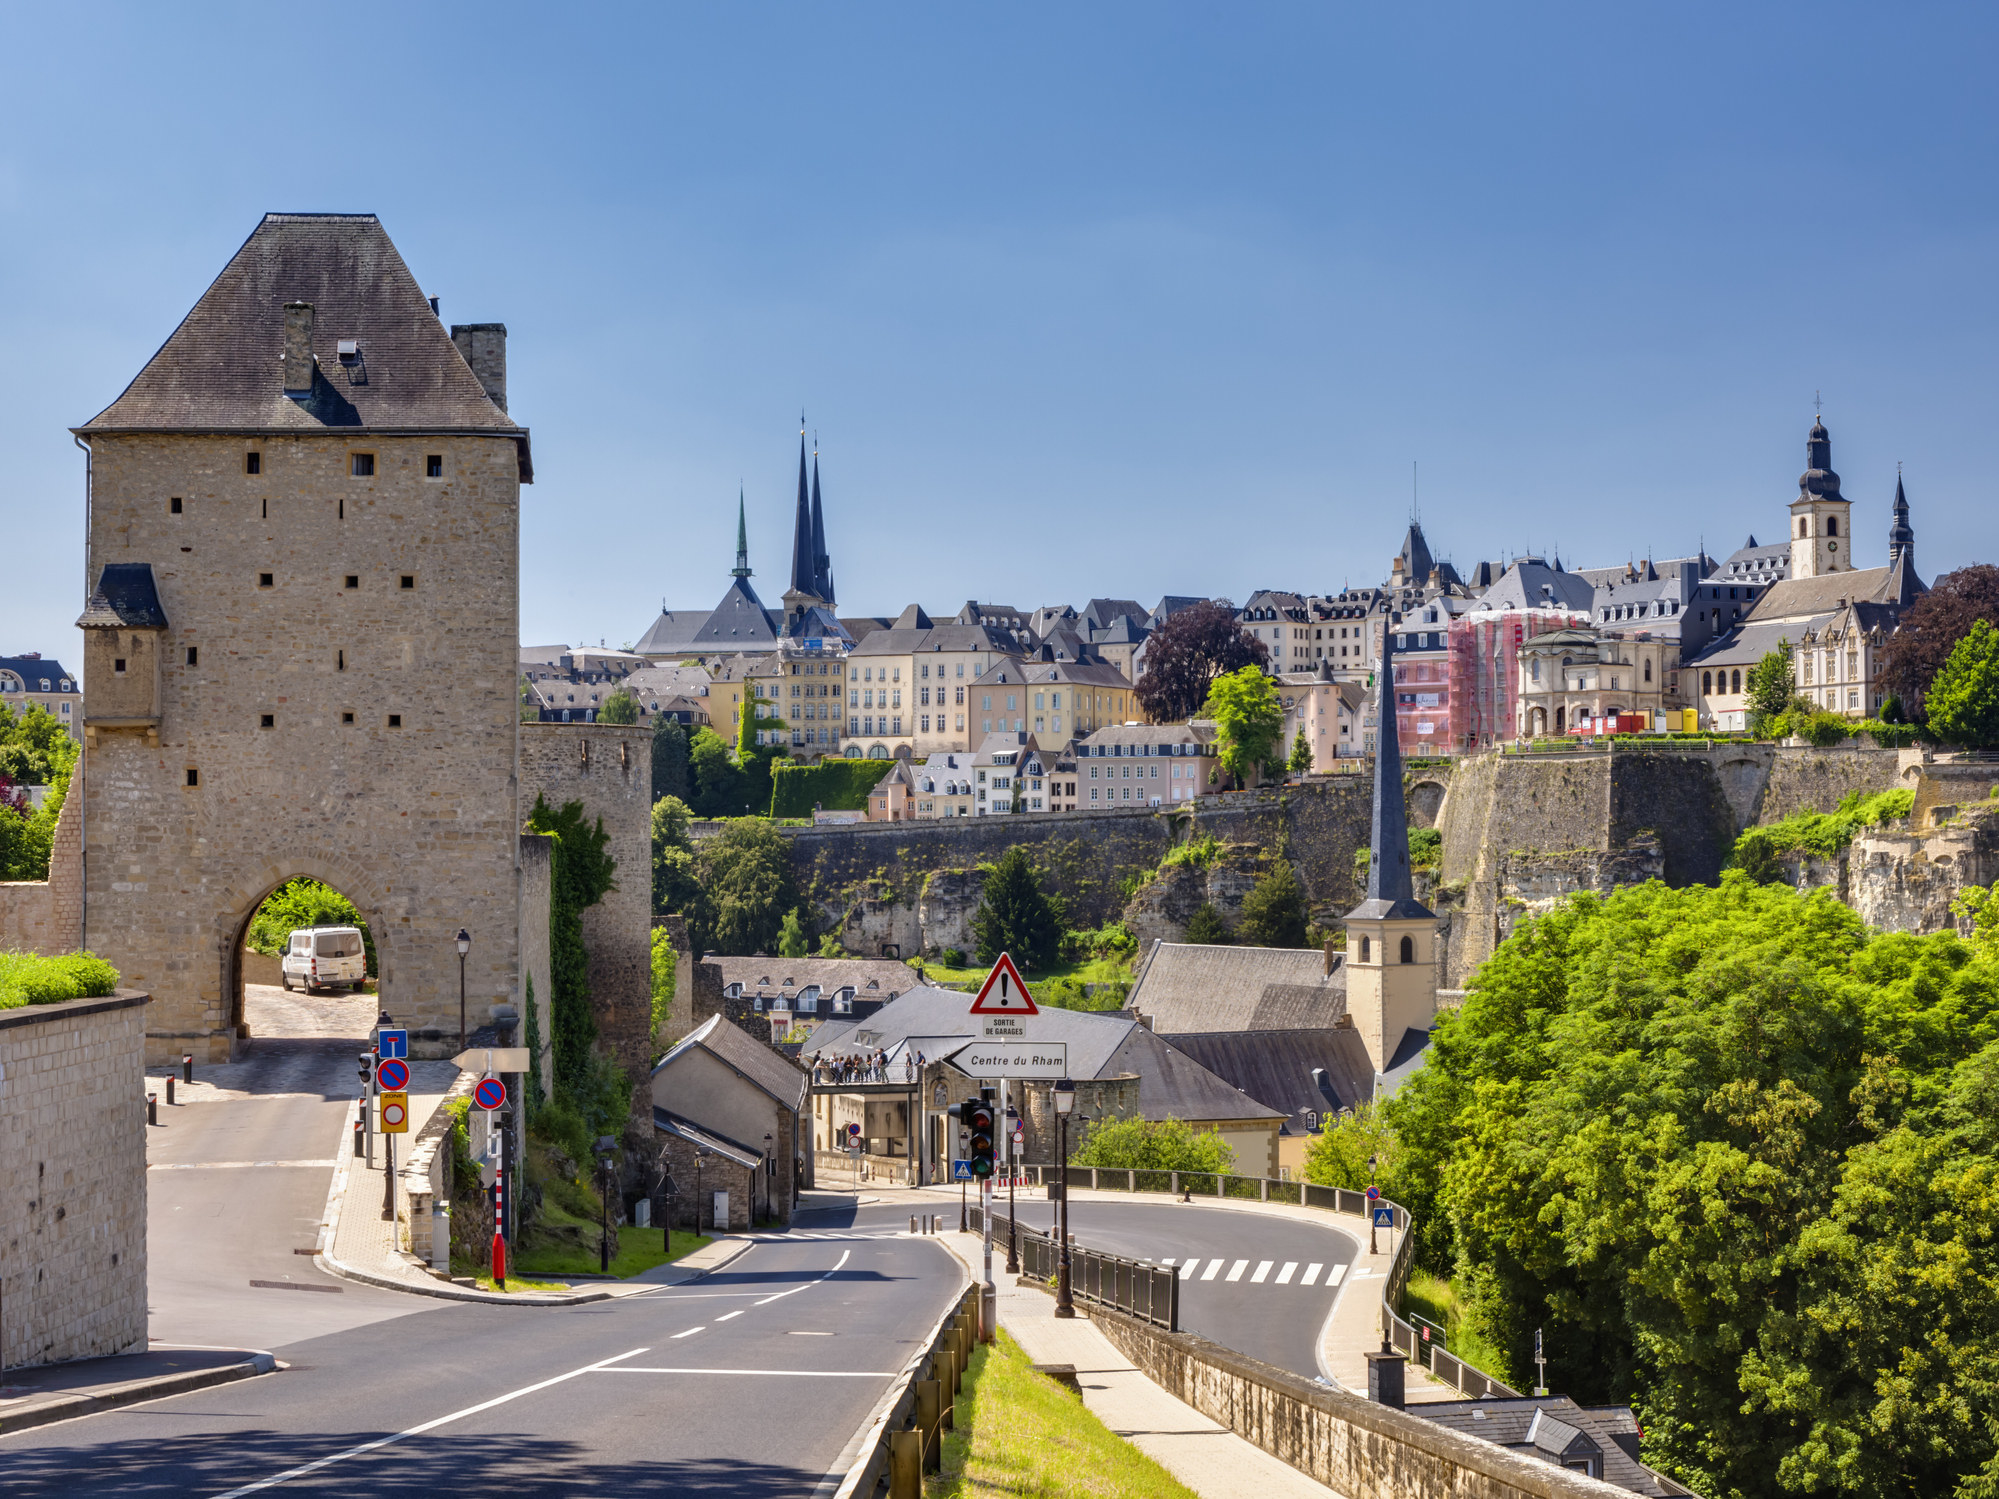 The city of Luxembourg.